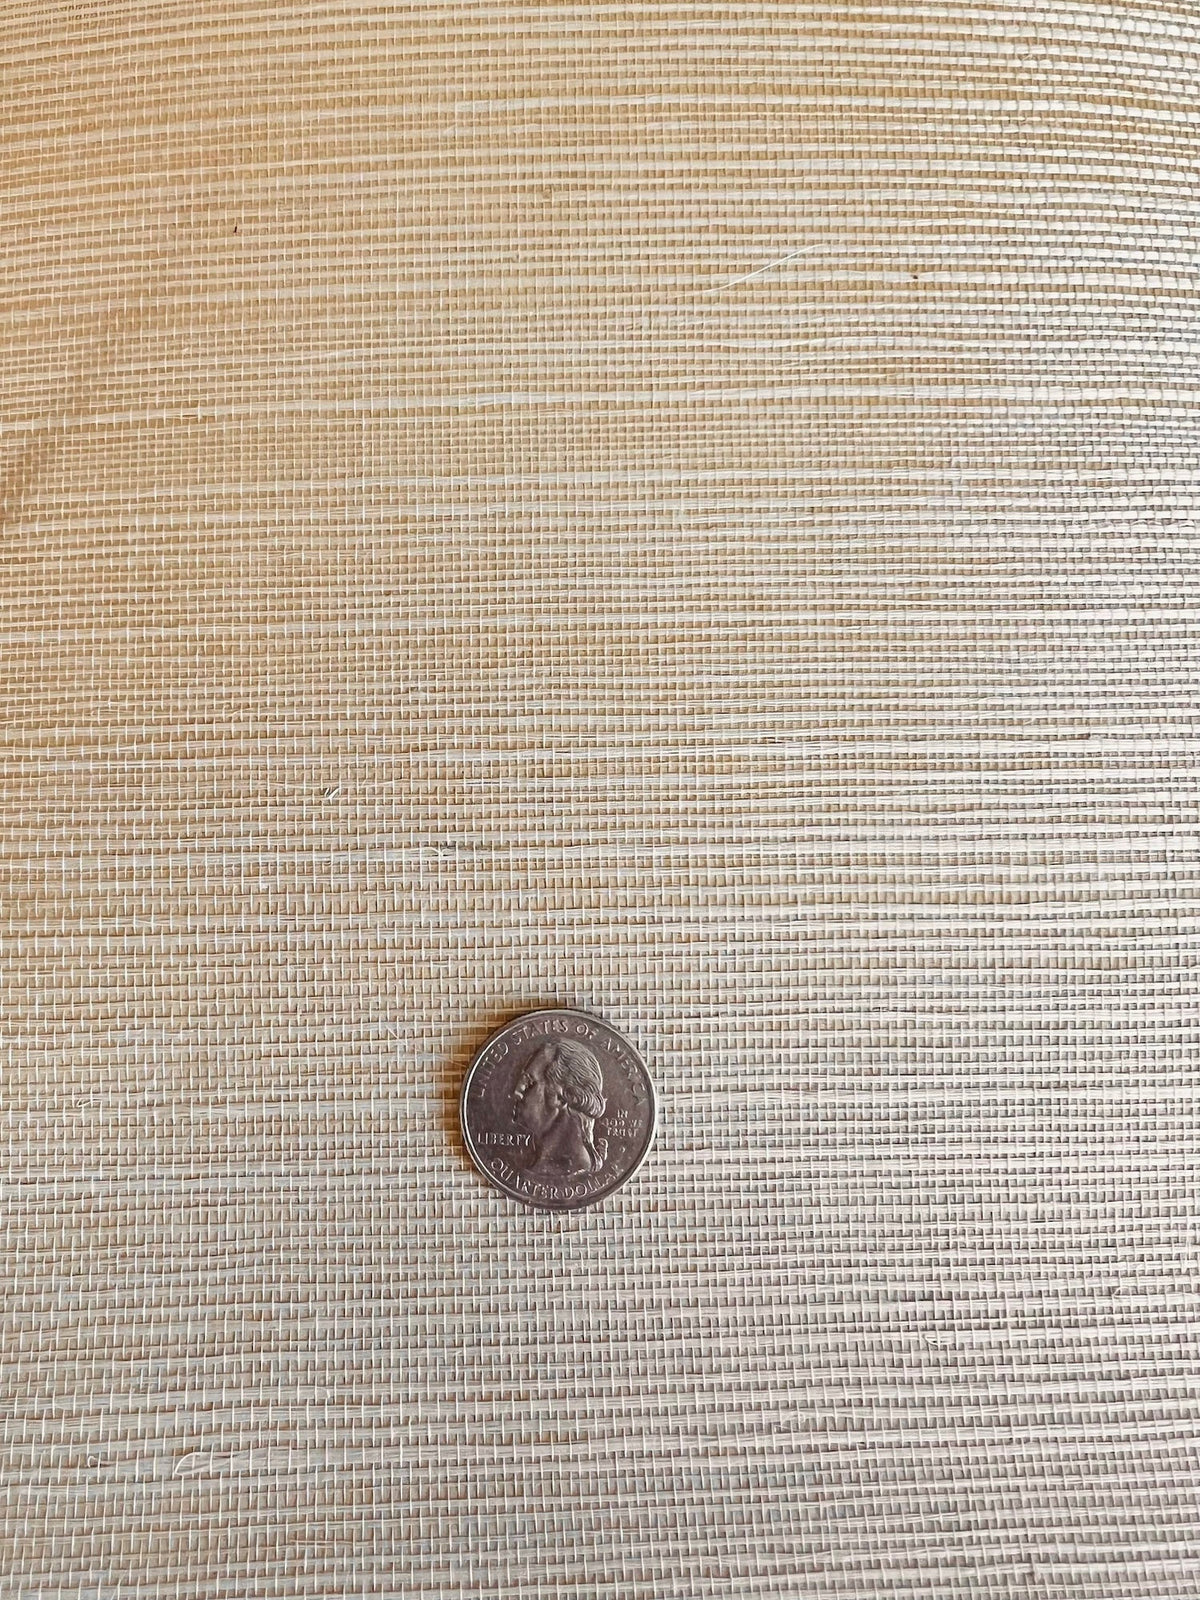 Tan grasscloth wallpaper with a quarter on top